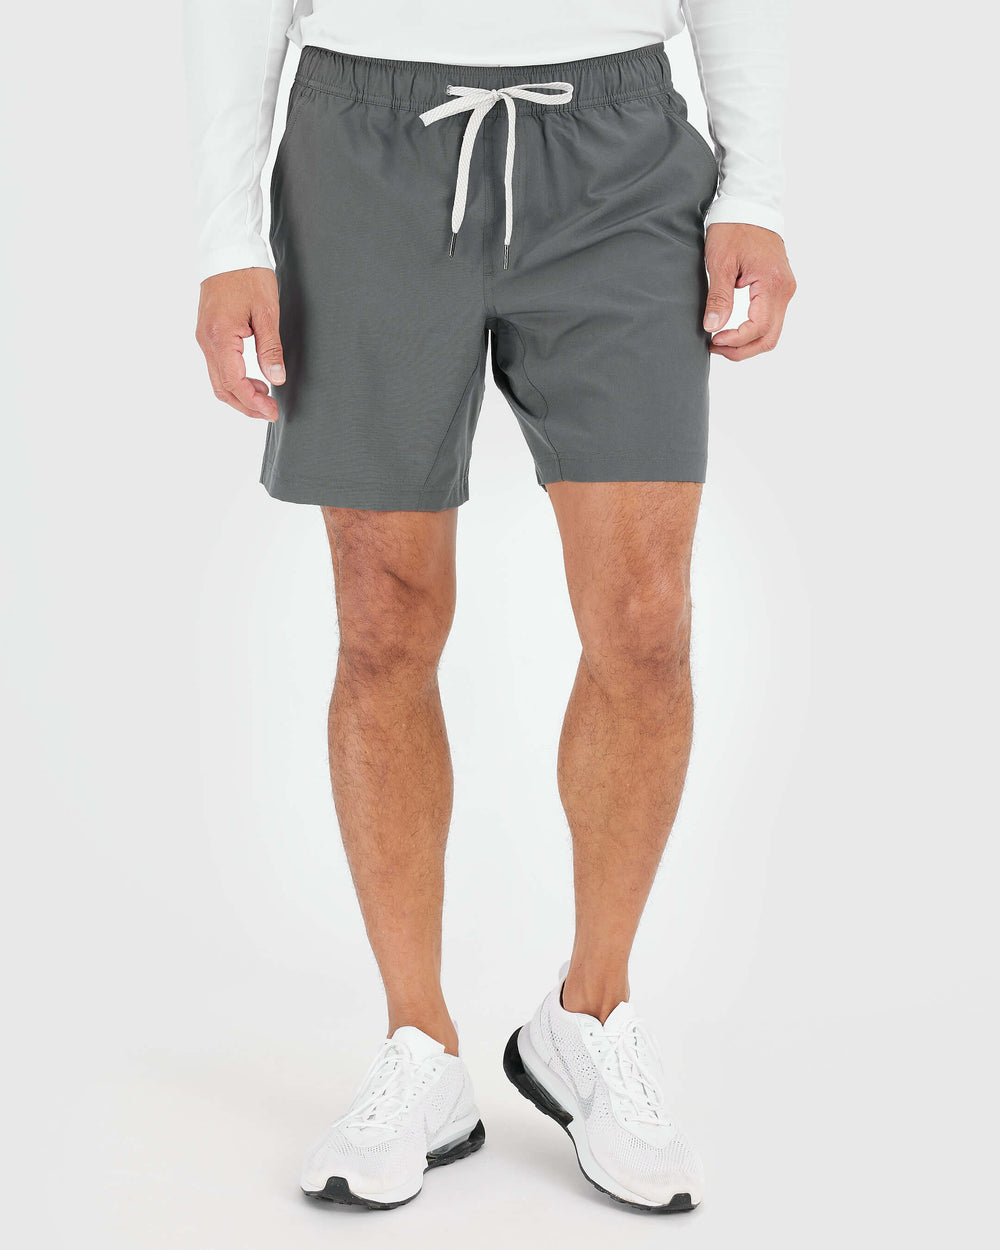 Carbon Active Quick Dry Shorts with Liner